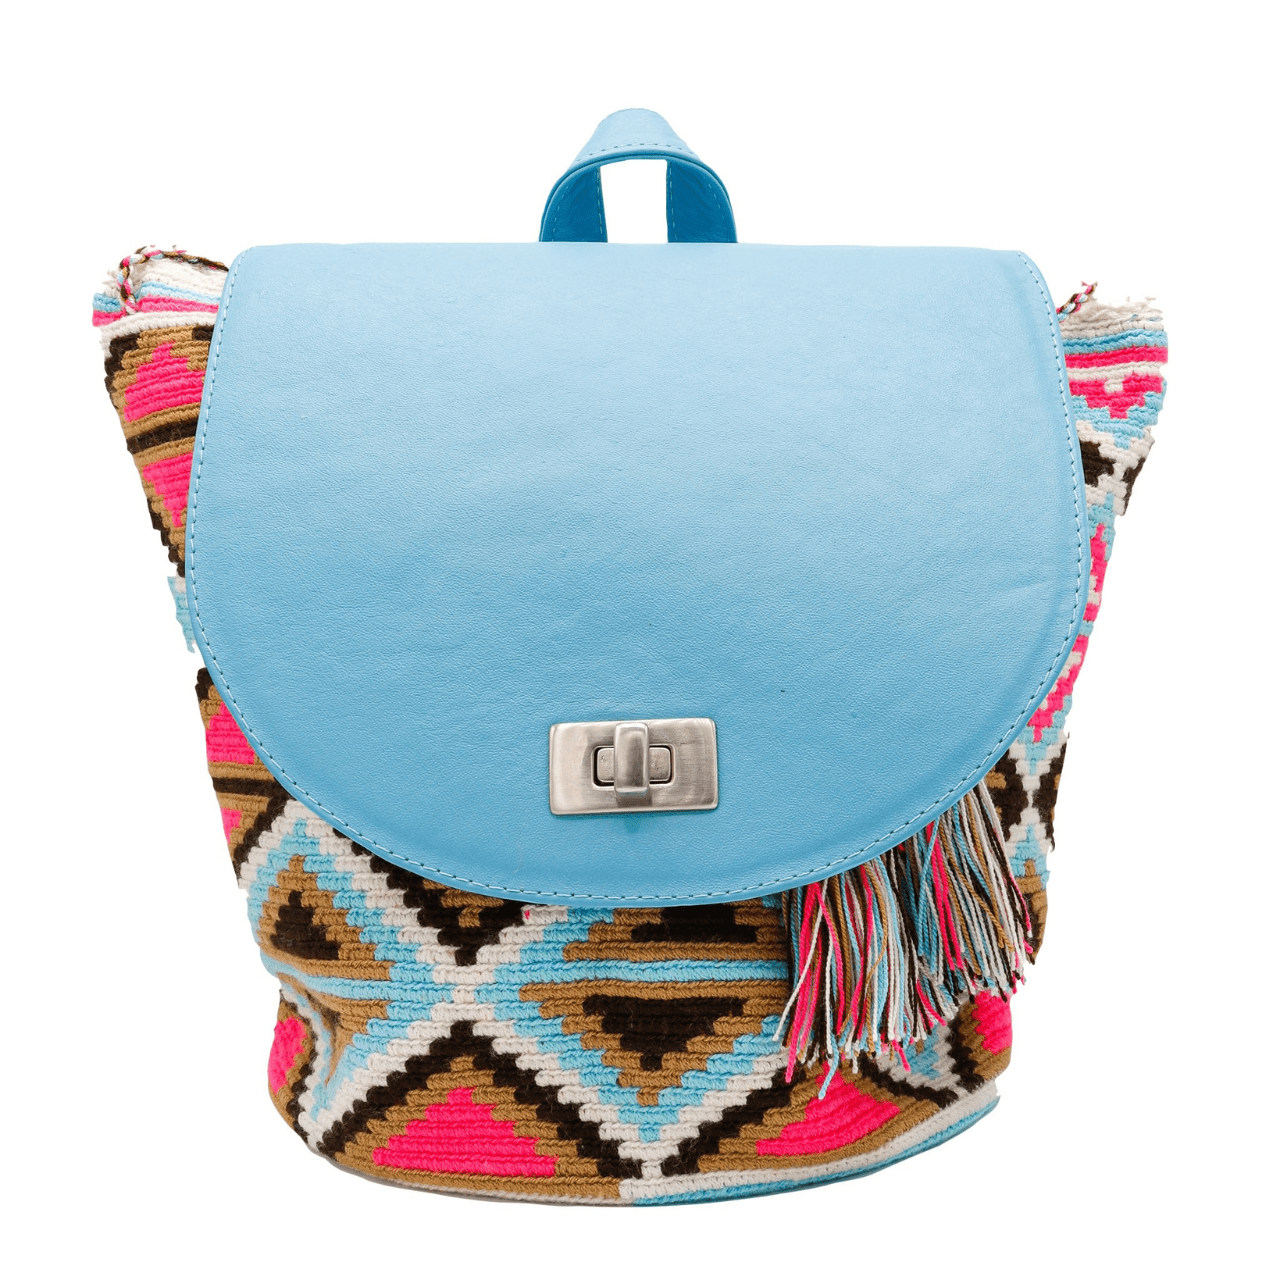 Mompox backpack purse for women, adorned with light blue genuine leather and showcasing an exceptionally unique Wayuu design on the body. The vibrant pattern features a delightful blend of sky blue, brown, tan, hot pink, and white hues, exuding a groovy and energetic vibe. Perfect for women seeking a stylish and trendy accessory.